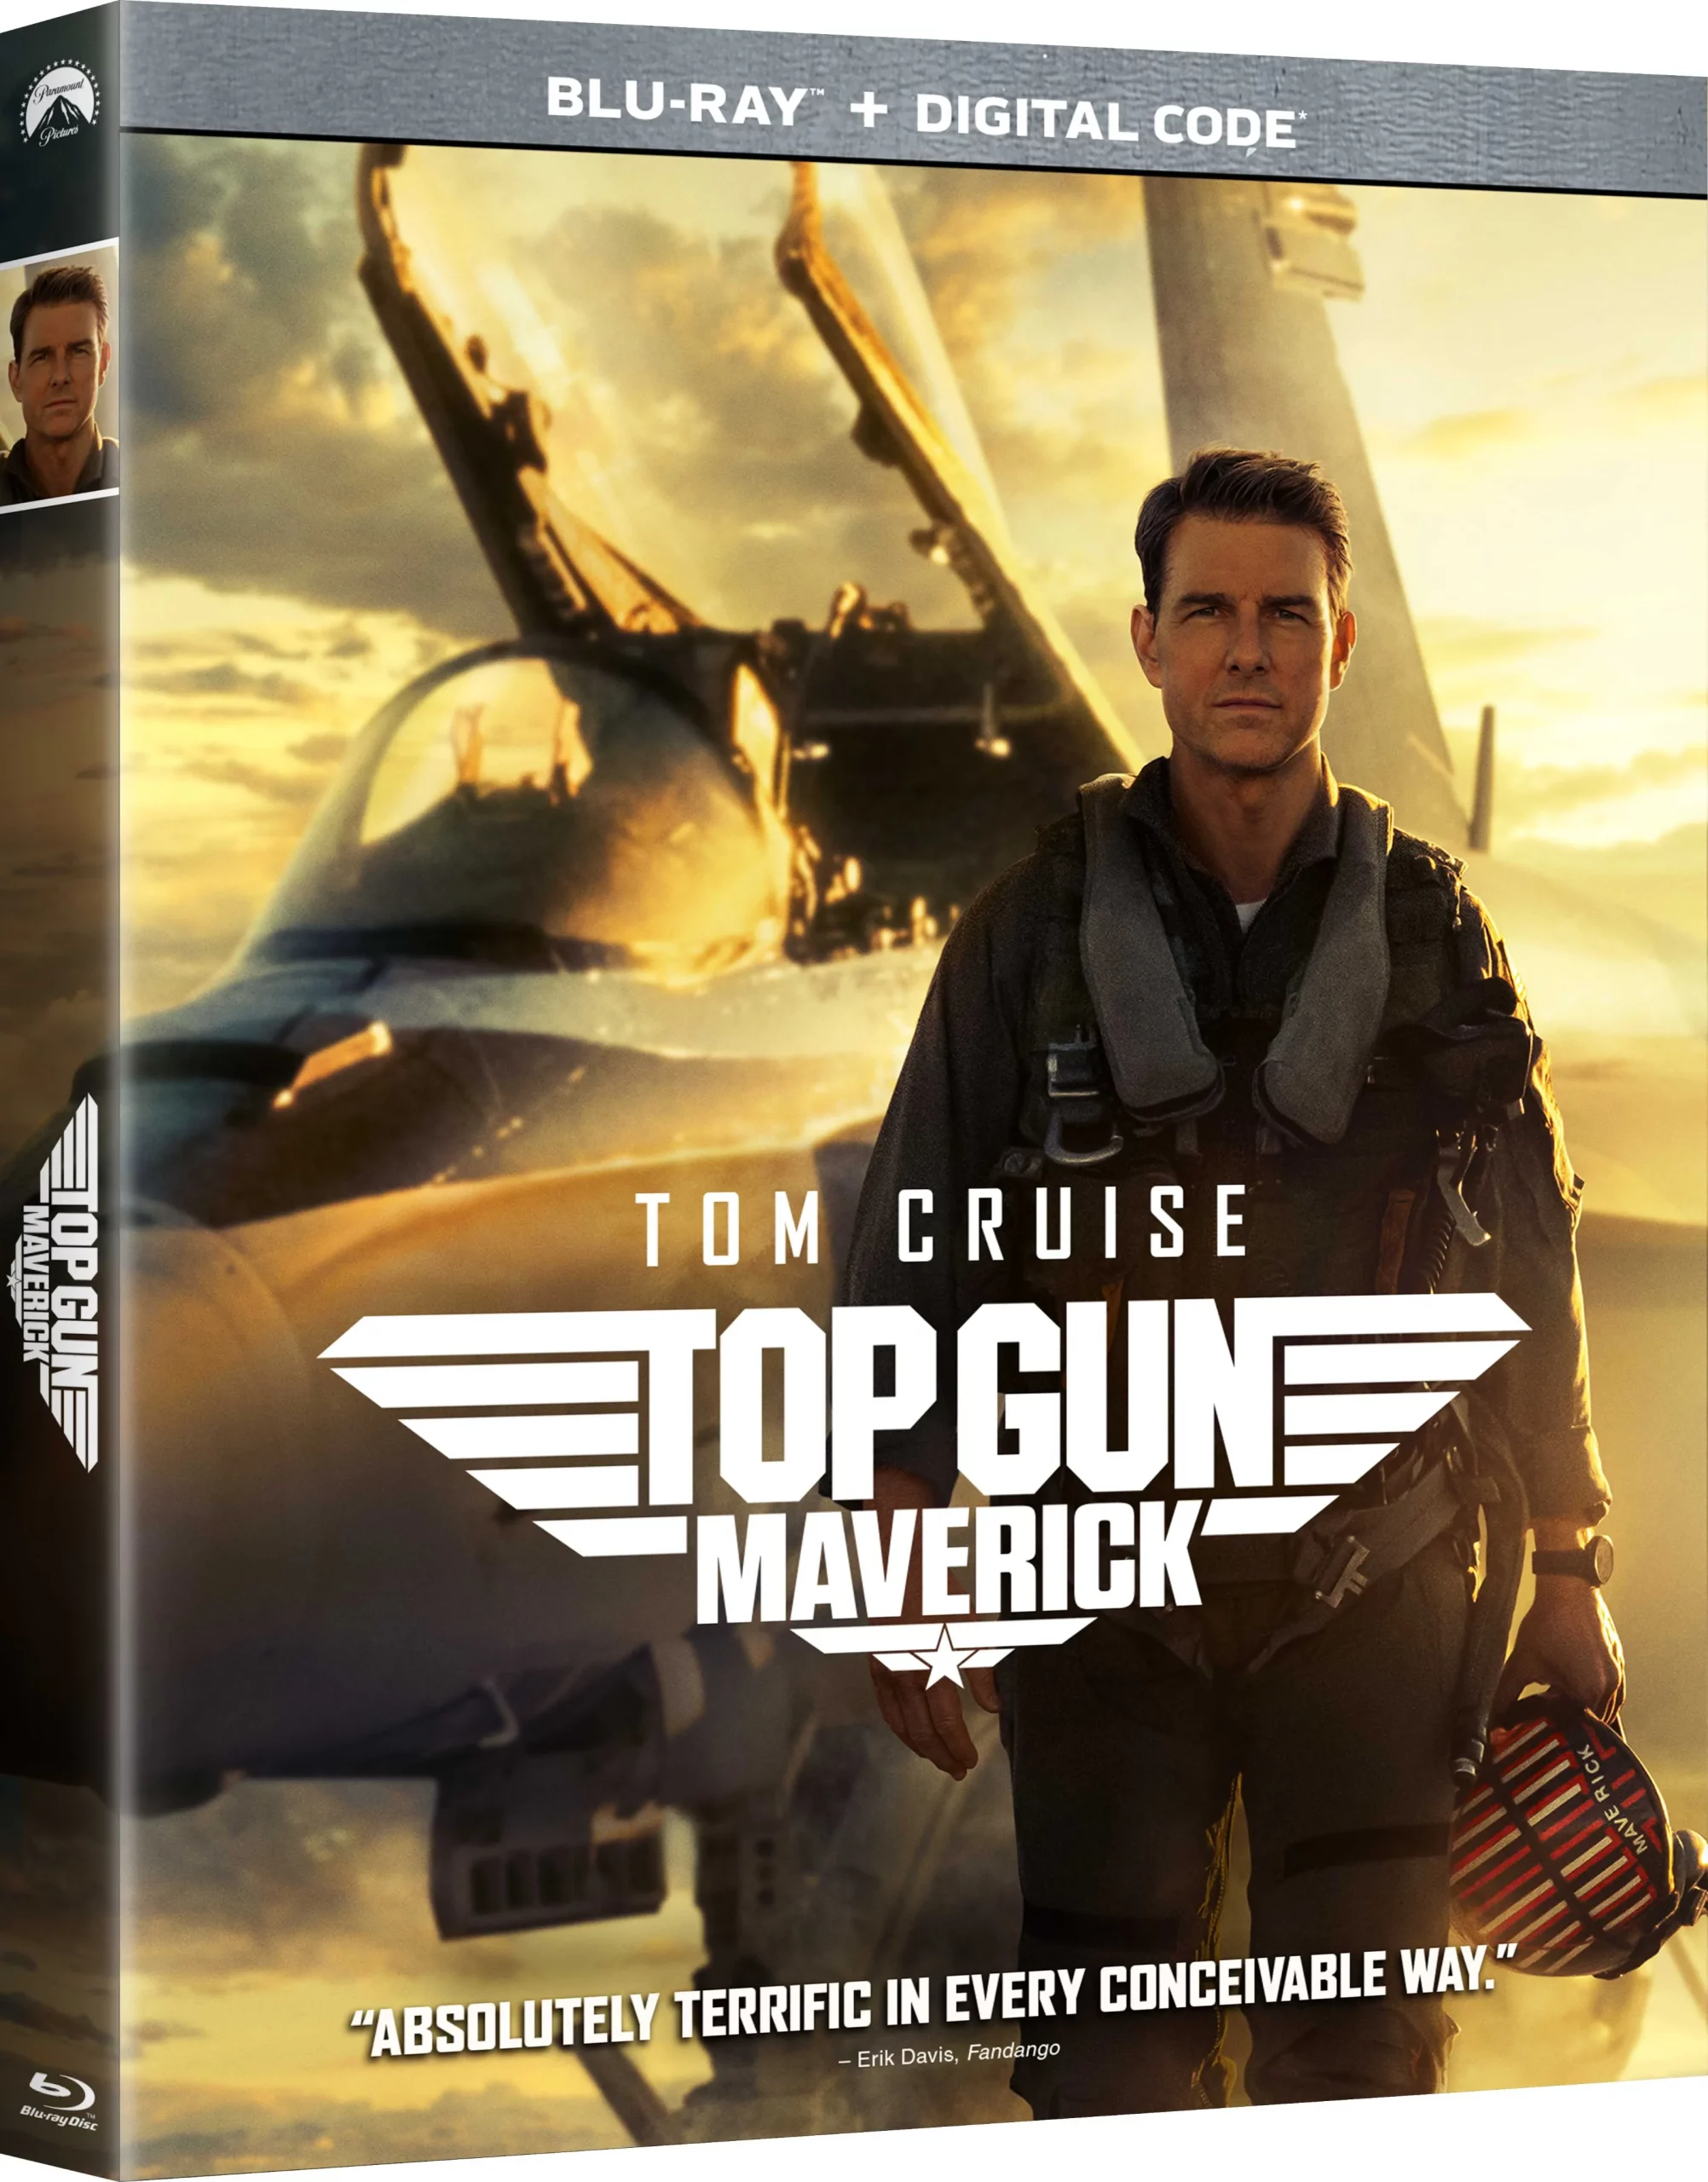 'Top Gun: Maverick' Blu-ray Disc Cover Revealed, Digital Version Available August 23, Physical Disc Released November 1 | FMV6